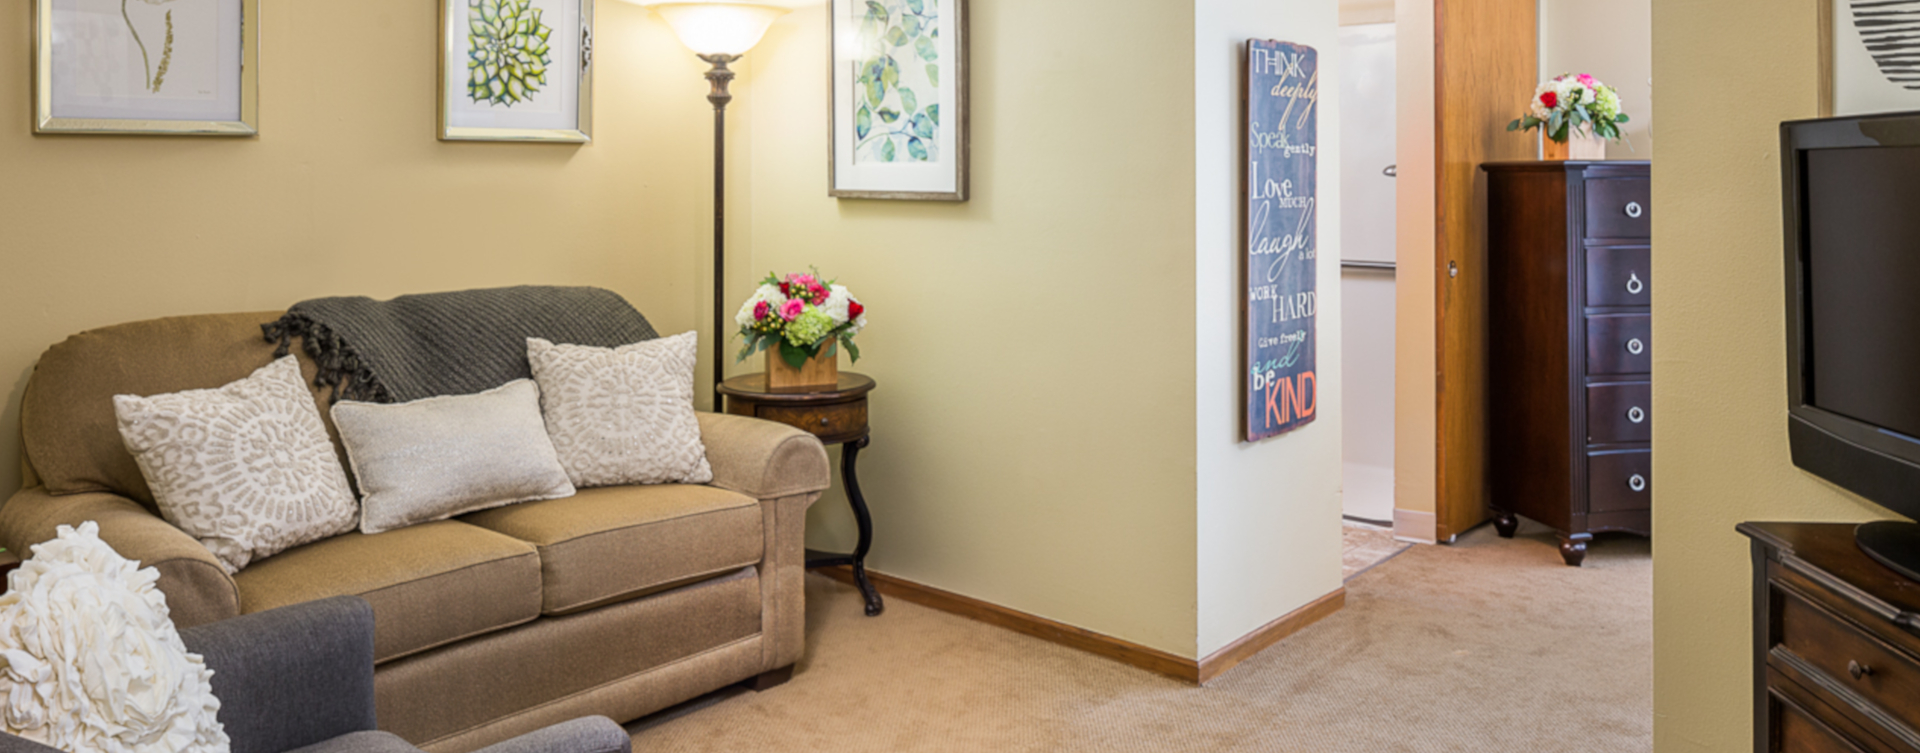 Enjoy senior friendly amenities, personal climate control and security in an apartment at Bickford of Omaha - Hickory